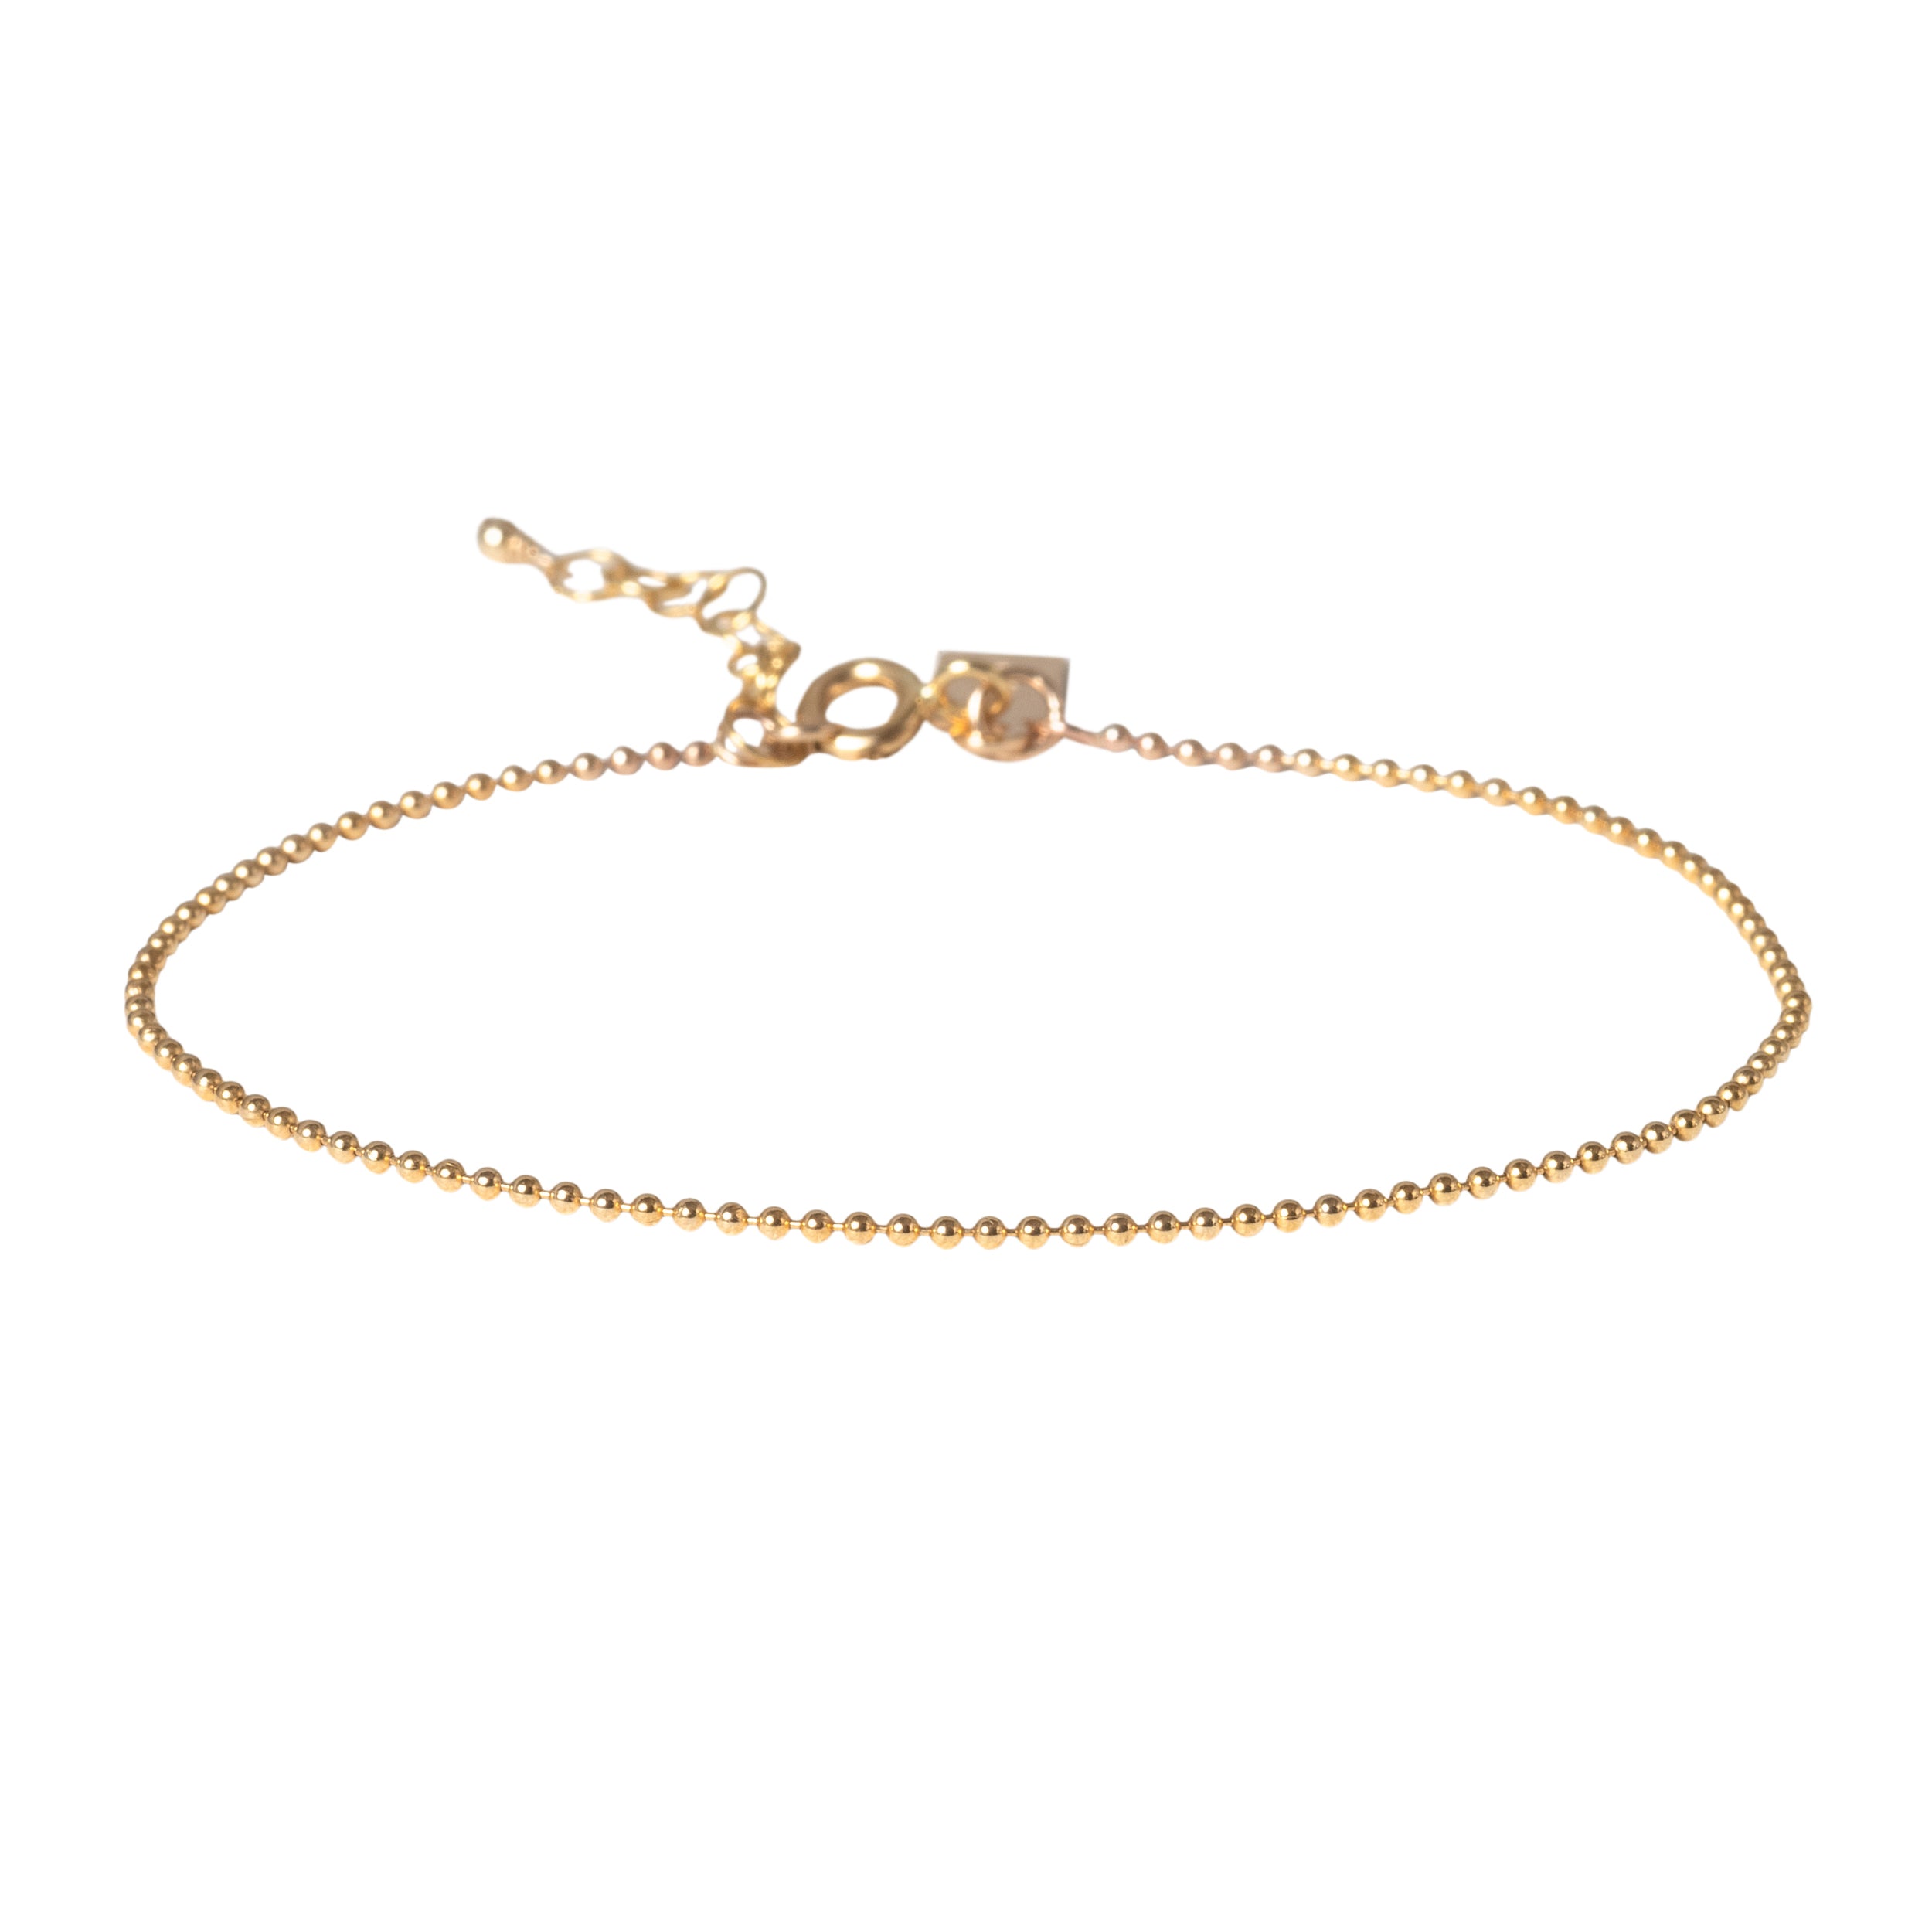 Tiny Ball Chain Bracelet from Favor Jewelry